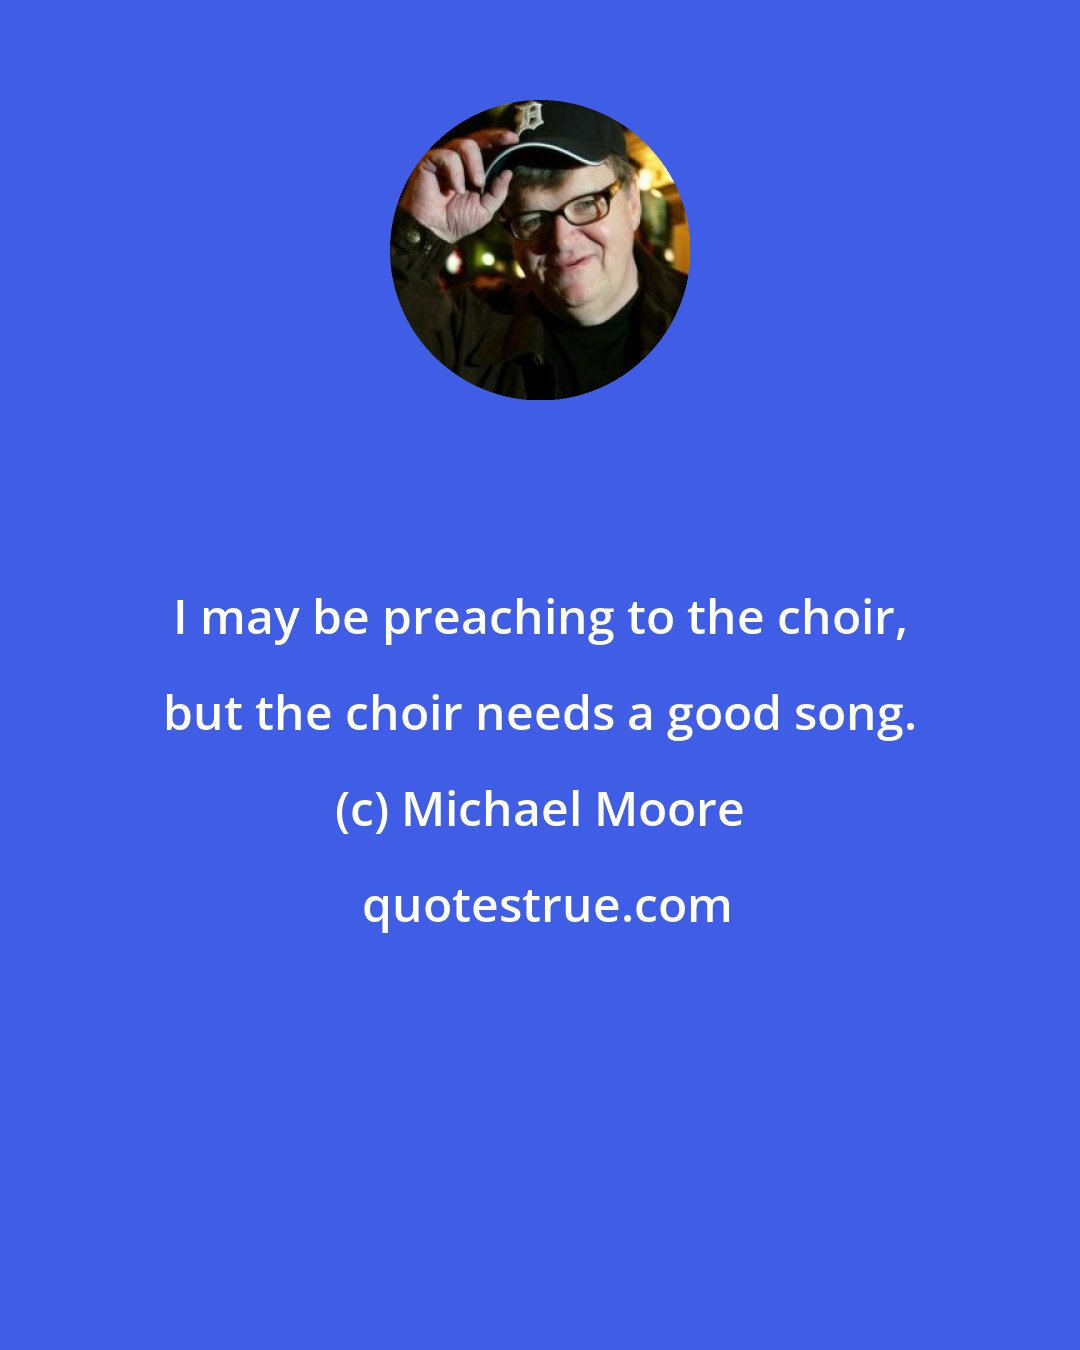 Michael Moore: I may be preaching to the choir, but the choir needs a good song.